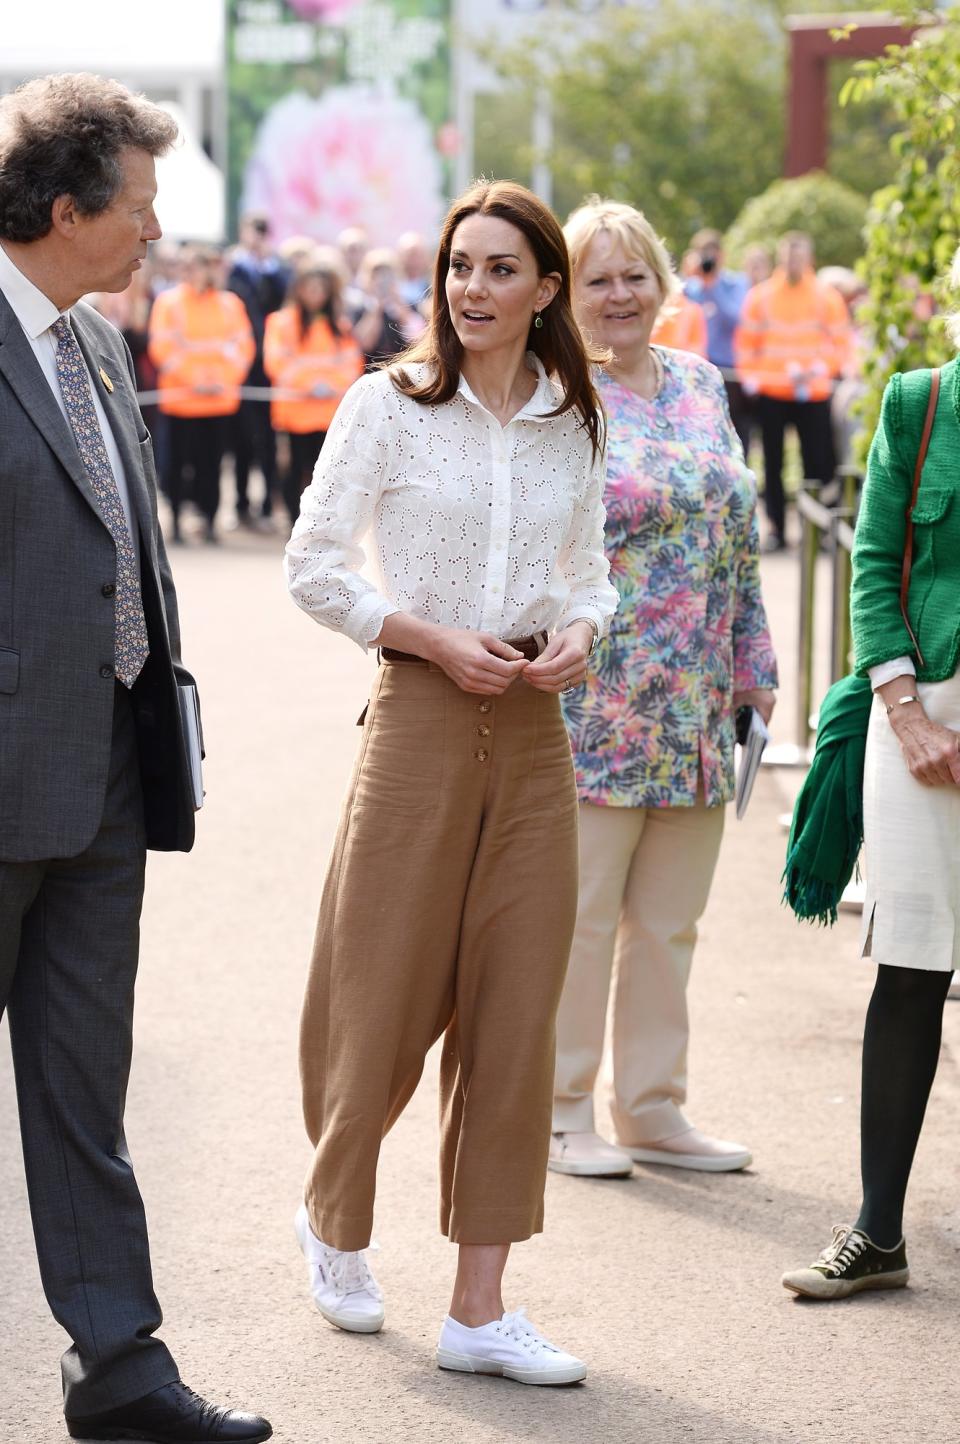 The Duchess of Cambridge went casual-chic at <a href="https://people.com/royals/kate-middleton-shares-her-new-garden-with-school-kids-and-her-hope-to-inspire-quality-time/" rel="nofollow noopener" target="_blank" data-ylk="slk:the opening of the Chelsea Flower Show in London;elm:context_link;itc:0;sec:content-canvas" class="link ">the opening of the Chelsea Flower Show in London</a> wearing a $325 broderie anglais crisp white top from M.i.h. Jeans paired with camel colored culottes from Massimo Dutti and her beloved <a href="https://click.linksynergy.com/deeplink?id=93xLBvPhAeE&mid=1237&murl=https%3A%2F%2Fshop.nordstrom.com%2Fs%2Fsuperga-cotu-sneaker-women%2F3284914&u1=PEO%2CShopping%3AEverythingYouNeedtoCopyKateMiddleton%E2%80%99sSummerStyle%2Ckamiphillips2%2CUnc%2CGal%2C7115494%2C201909%2CI" rel="nofollow noopener" target="_blank" data-ylk="slk:white Superga sneakers;elm:context_link;itc:0;sec:content-canvas" class="link ">white Superga sneakers</a>. <strong>Get the Look!</strong> J.Crew Mixed Eyelet Popover Top, $75; <a href="https://click.linksynergy.com/deeplink?id=93xLBvPhAeE&mid=1237&murl=https%3A%2F%2Fshop.nordstrom.com%2Fs%2Fj-crew-mixed-eyelet-popover-top-regular-plus-size%2F5268101&u1=PEO%2CShopping%3AEverythingYouNeedtoCopyKateMiddleton%E2%80%99sSummerStyle%2Ckamiphillips2%2CUnc%2CGal%2C7115494%2C201909%2CI" rel="nofollow noopener" target="_blank" data-ylk="slk:nordstrom.com;elm:context_link;itc:0;sec:content-canvas" class="link ">nordstrom.com</a> Hale Bob Embroidered Eyelet Blouse, $92.97 (orig. $218); <a href="https://www.pjatr.com/t/8-10134-131940-120793?sid=PEO%2CShopping%3AEverythingYouNeedtoCopyKateMiddleton%E2%80%99sSummerStyle%2Ckamiphillips2%2CUnc%2CGal%2C7115494%2C201909%2CI&url=https%3A%2F%2Fwww.nordstromrack.com%2Fshop%2Fproduct%2F2772823%2Fhale-bob-embroidered-eyelet-blouse%3Fcolor%3DWHITE" rel="nofollow noopener" target="_blank" data-ylk="slk:nordstromrack.com;elm:context_link;itc:0;sec:content-canvas" class="link ">nordstromrack.com</a> Polo Ralph Lauren Eyelet Linen Shirt, $198; <a href="https://click.linksynergy.com/deeplink?id=93xLBvPhAeE&mid=1237&murl=https%3A%2F%2Fshop.nordstrom.com%2Fs%2Fpolo-ralph-lauren-eyelet-linen-shirt%2F5250882&u1=PEO%2CShopping%3AEverythingYouNeedtoCopyKateMiddleton%E2%80%99sSummerStyle%2Ckamiphillips2%2CUnc%2CGal%2C7115494%2C201909%2CI" rel="nofollow noopener" target="_blank" data-ylk="slk:nordstrom.com;elm:context_link;itc:0;sec:content-canvas" class="link ">nordstrom.com</a> Joie Janah Eyelet Lace Blouse, $208.50 (orig. $278); <a href="https://click.linksynergy.com/deeplink?id=93xLBvPhAeE&mid=13867&murl=https%3A%2F%2Fwww.bloomingdales.com%2Fshop%2Fproduct%2Fjoie-janah-eyelet-lace-top%3FID%3D3282096&u1=PEO%2CShopping%3AEverythingYouNeedtoCopyKateMiddleton%E2%80%99sSummerStyle%2Ckamiphillips2%2CUnc%2CGal%2C7115494%2C201909%2CI" rel="nofollow noopener" target="_blank" data-ylk="slk:bloomingdales.com;elm:context_link;itc:0;sec:content-canvas" class="link ">bloomingdales.com</a> Free People Patti Pant, $38 (orig. $78); <a href="http://www.anrdoezrs.net/links/8029122/type/dlg/sid/PEO,Shopping:EverythingYouNeedtoCopyKateMiddleton’sSummerStyle,kamiphillips2,Unc,Gal,7115494,201909,I/https://www.revolve.com/free-people-patti-pant/dp/FREE-WP269/" rel="nofollow noopener" target="_blank" data-ylk="slk:revolve.com;elm:context_link;itc:0;sec:content-canvas" class="link ">revolve.com</a> Everlane The Wide Leg Crop Pant, $68; <a href="https://www.pjtra.com/t/8-9711-131940-104709?sid=PEO%2CShopping%3AEverythingYouNeedtoCopyKateMiddleton%E2%80%99sSummerStyle%2Ckamiphillips2%2CUnc%2CGal%2C7115494%2C201909%2CI&url=https%3A%2F%2Fwww.everlane.com%2Fproducts%2Fwomens-hirise-wide-crop-pant-ochre%3Fcollection%3Dwomens-bottoms" rel="nofollow noopener" target="_blank" data-ylk="slk:everlane.com;elm:context_link;itc:0;sec:content-canvas" class="link ">everlane.com</a> Madewell Emmett High Waist Crop Wide Leg Pants, $68 (orig. $88); <a href="https://click.linksynergy.com/deeplink?id=93xLBvPhAeE&mid=1237&murl=https%3A%2F%2Fshop.nordstrom.com%2Fs%2Fmadewell-emmett-high-waist-crop-wide-leg-pants%2F5033528&u1=PEO%2CShopping%3AEverythingYouNeedtoCopyKateMiddleton%E2%80%99sSummerStyle%2Ckamiphillips2%2CUnc%2CGal%2C7115494%2C201909%2CI" rel="nofollow noopener" target="_blank" data-ylk="slk:nordstrom.com;elm:context_link;itc:0;sec:content-canvas" class="link ">nordstrom.com</a>